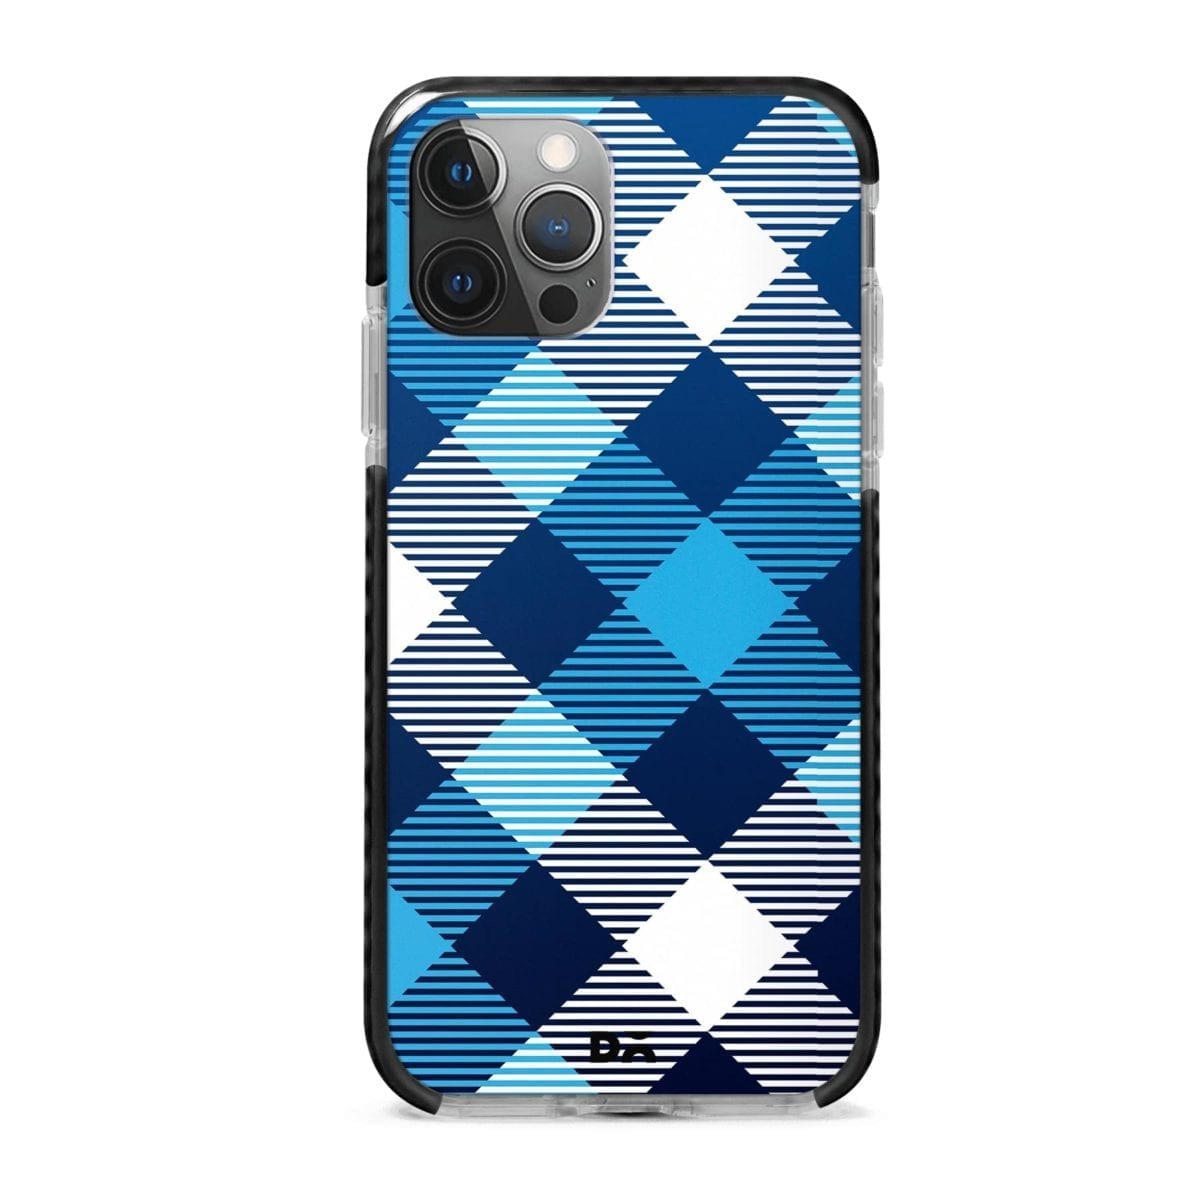 Medium Static Nightfall Checks Stride Case Cover for Apple iPhone 12 Pro and Apple iPhone 12 Pro Max with great design and shock proof | Klippik | Online Shopping | Kuwait UAE Saudi